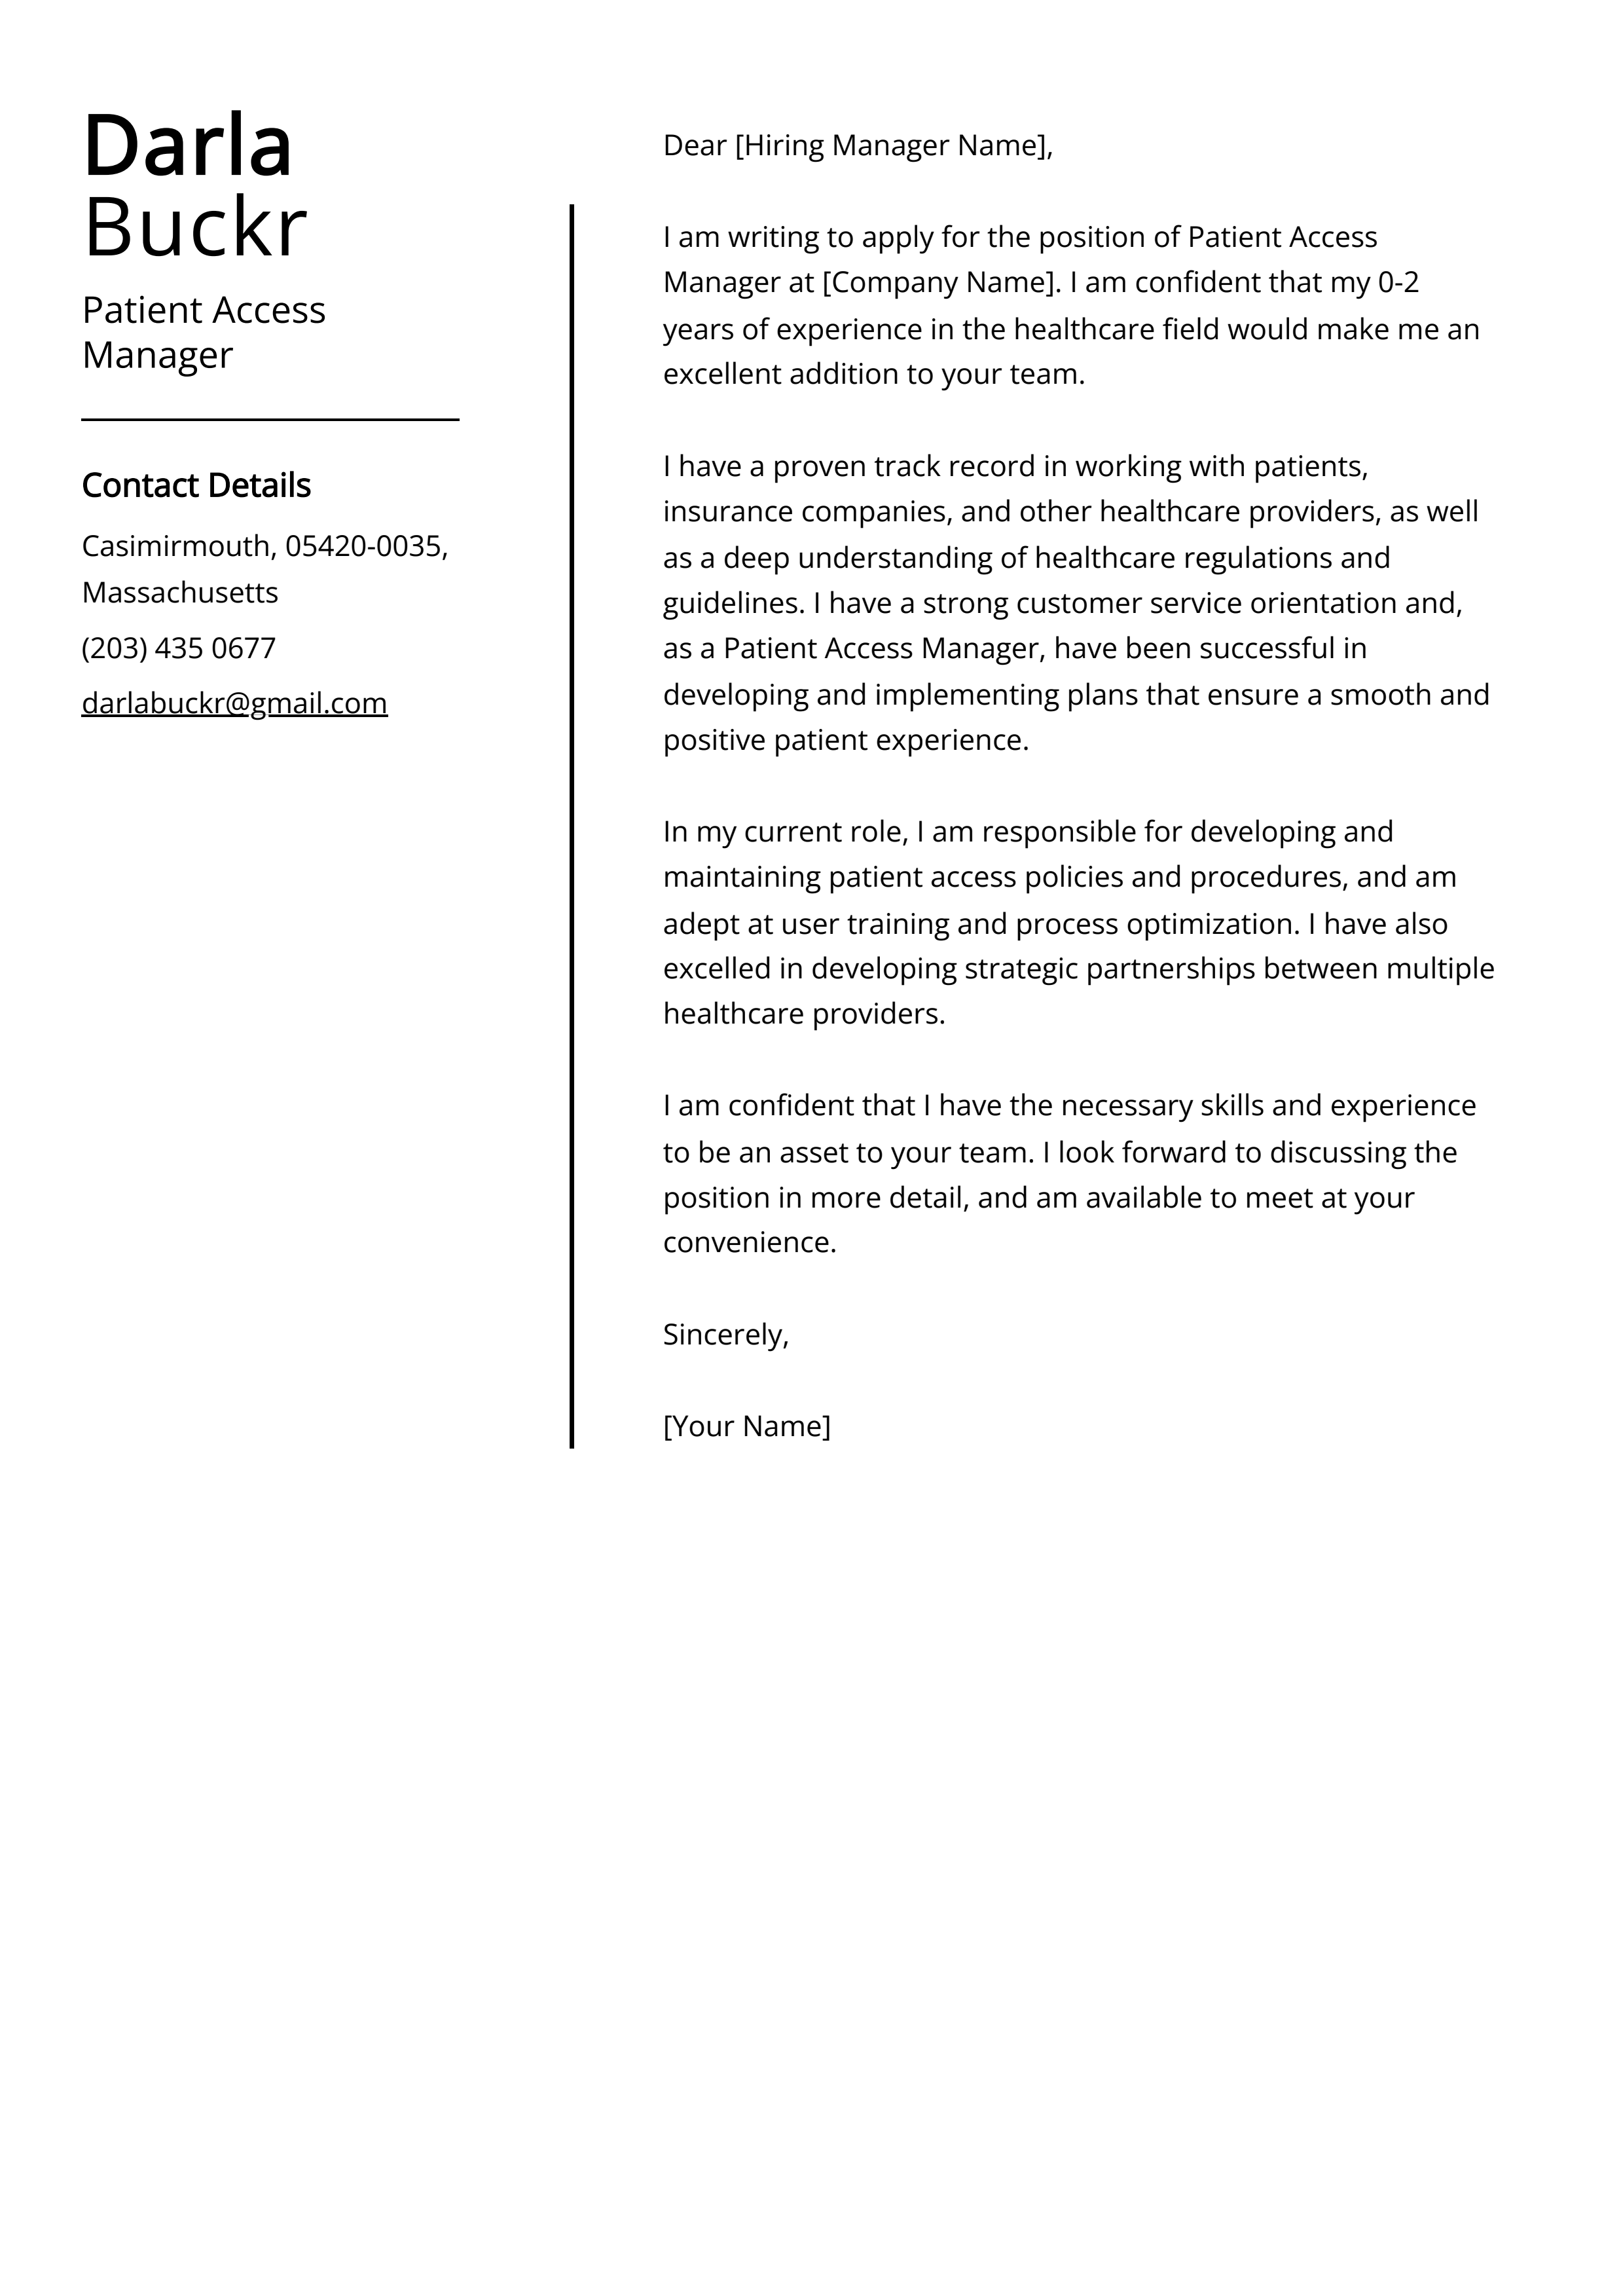 Patient Access Manager Cover Letter Example